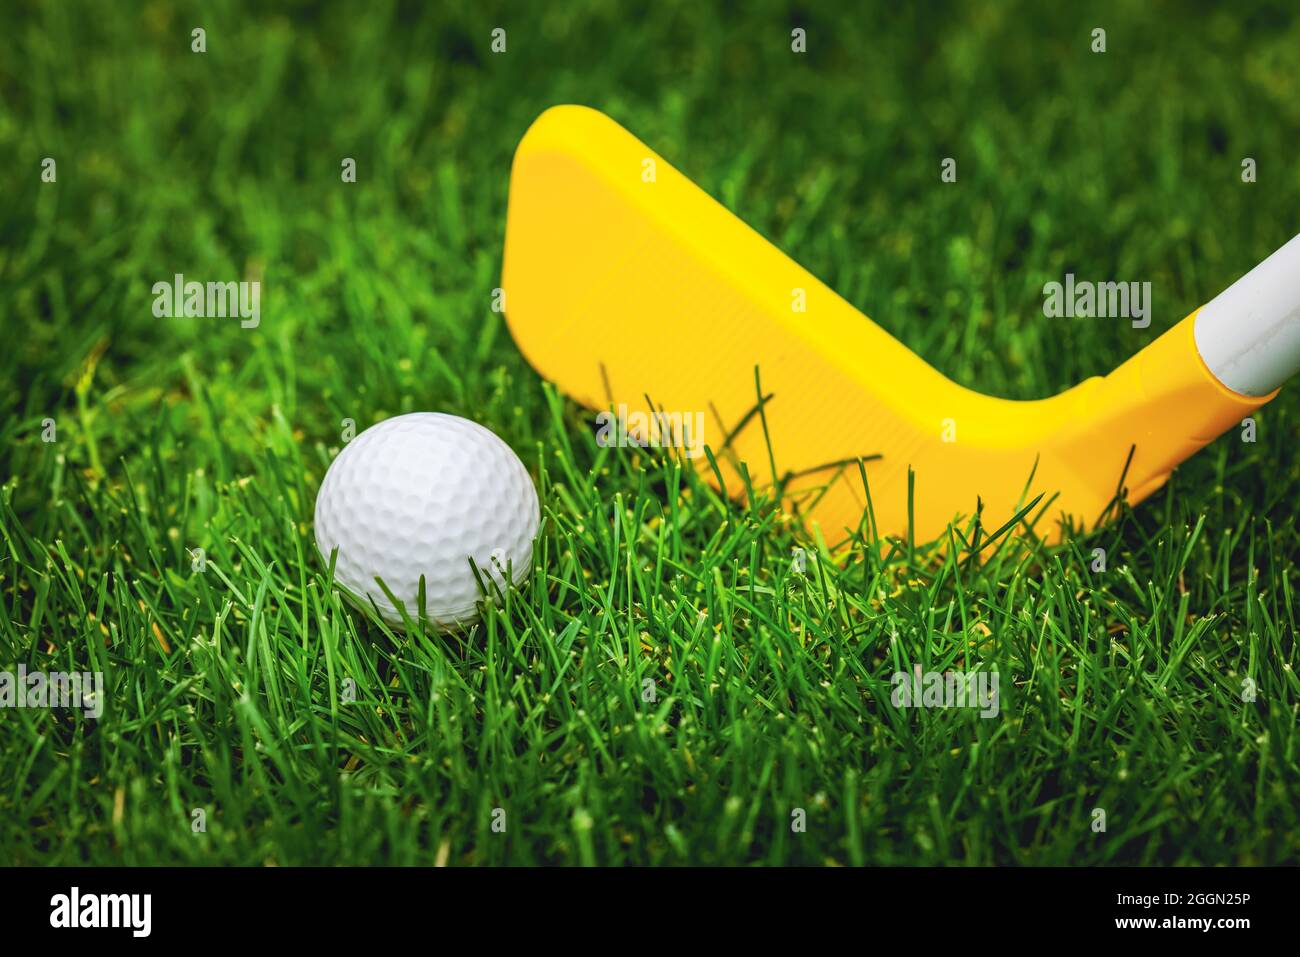 plastic toy golf ball and club on green grass Stock Photo